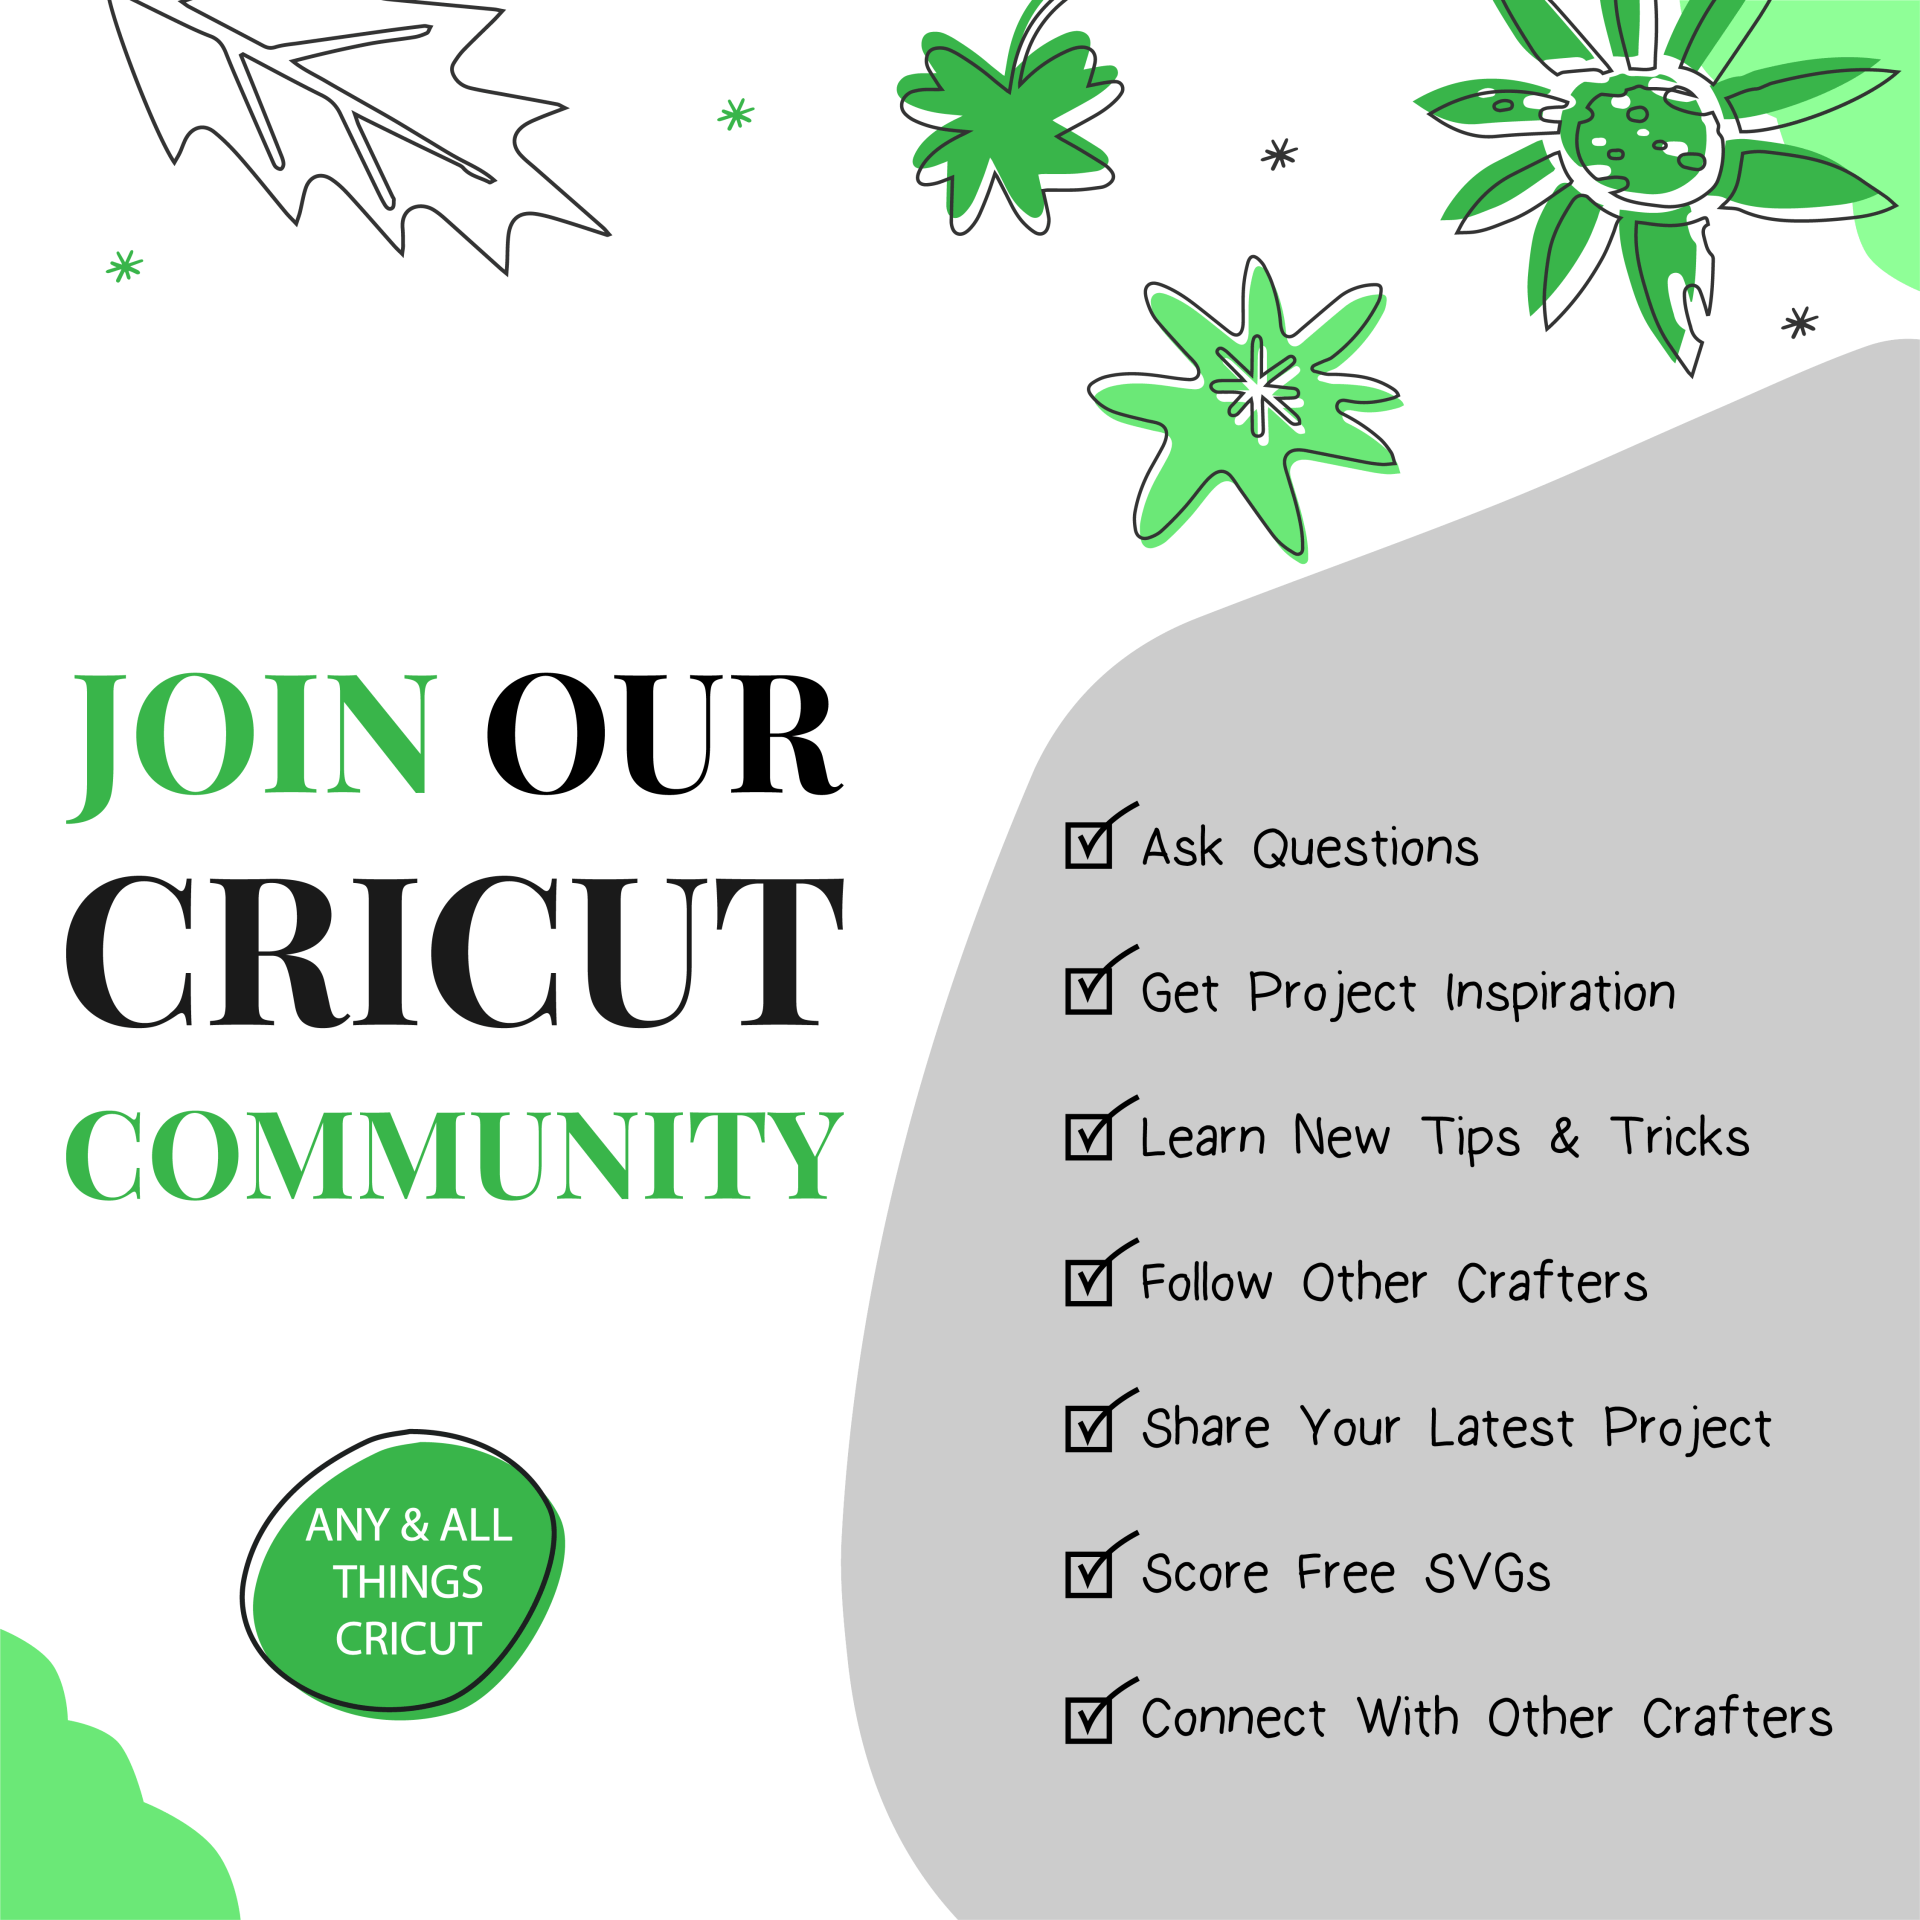 Invitation to join Any and All things Cricut